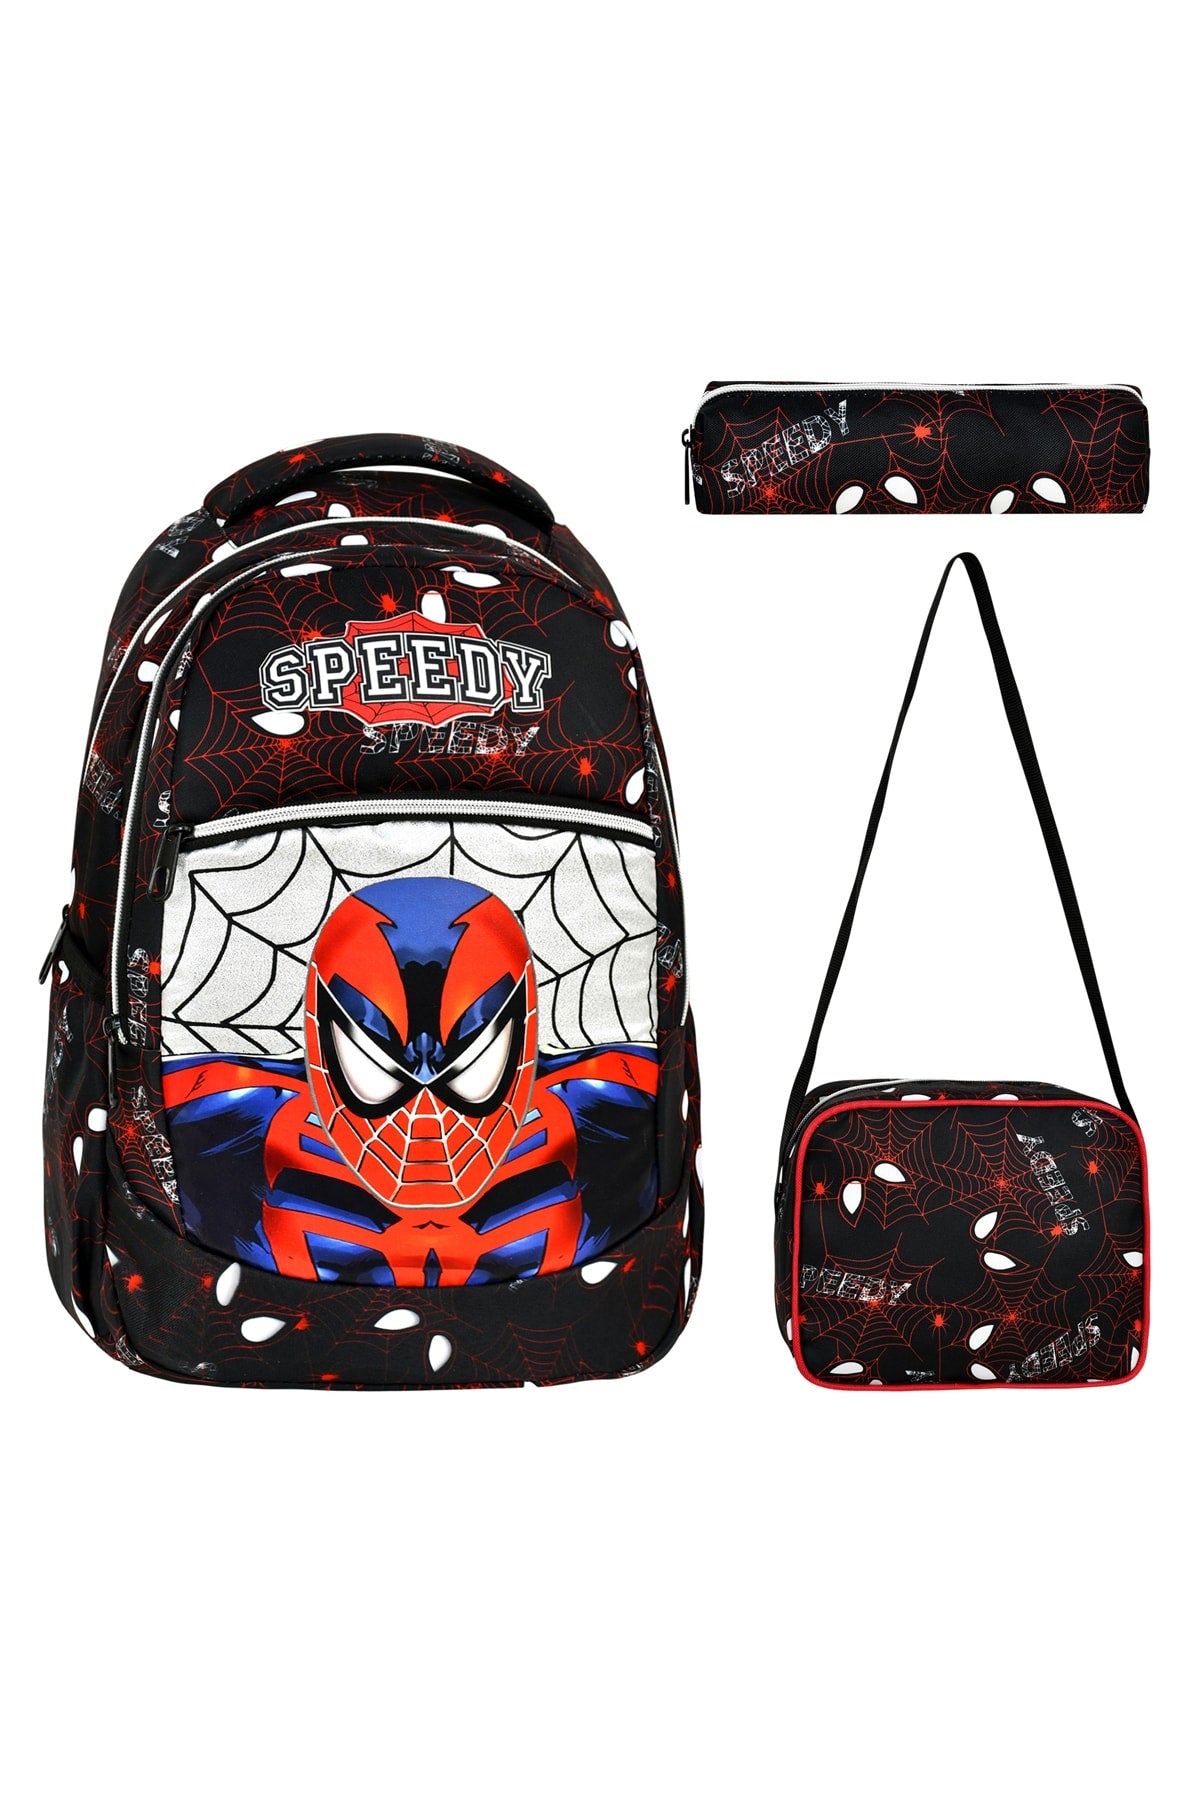 3-pack Elementary School Spider-Man Patterned School Bag For Boy With Food And Pencil Holder